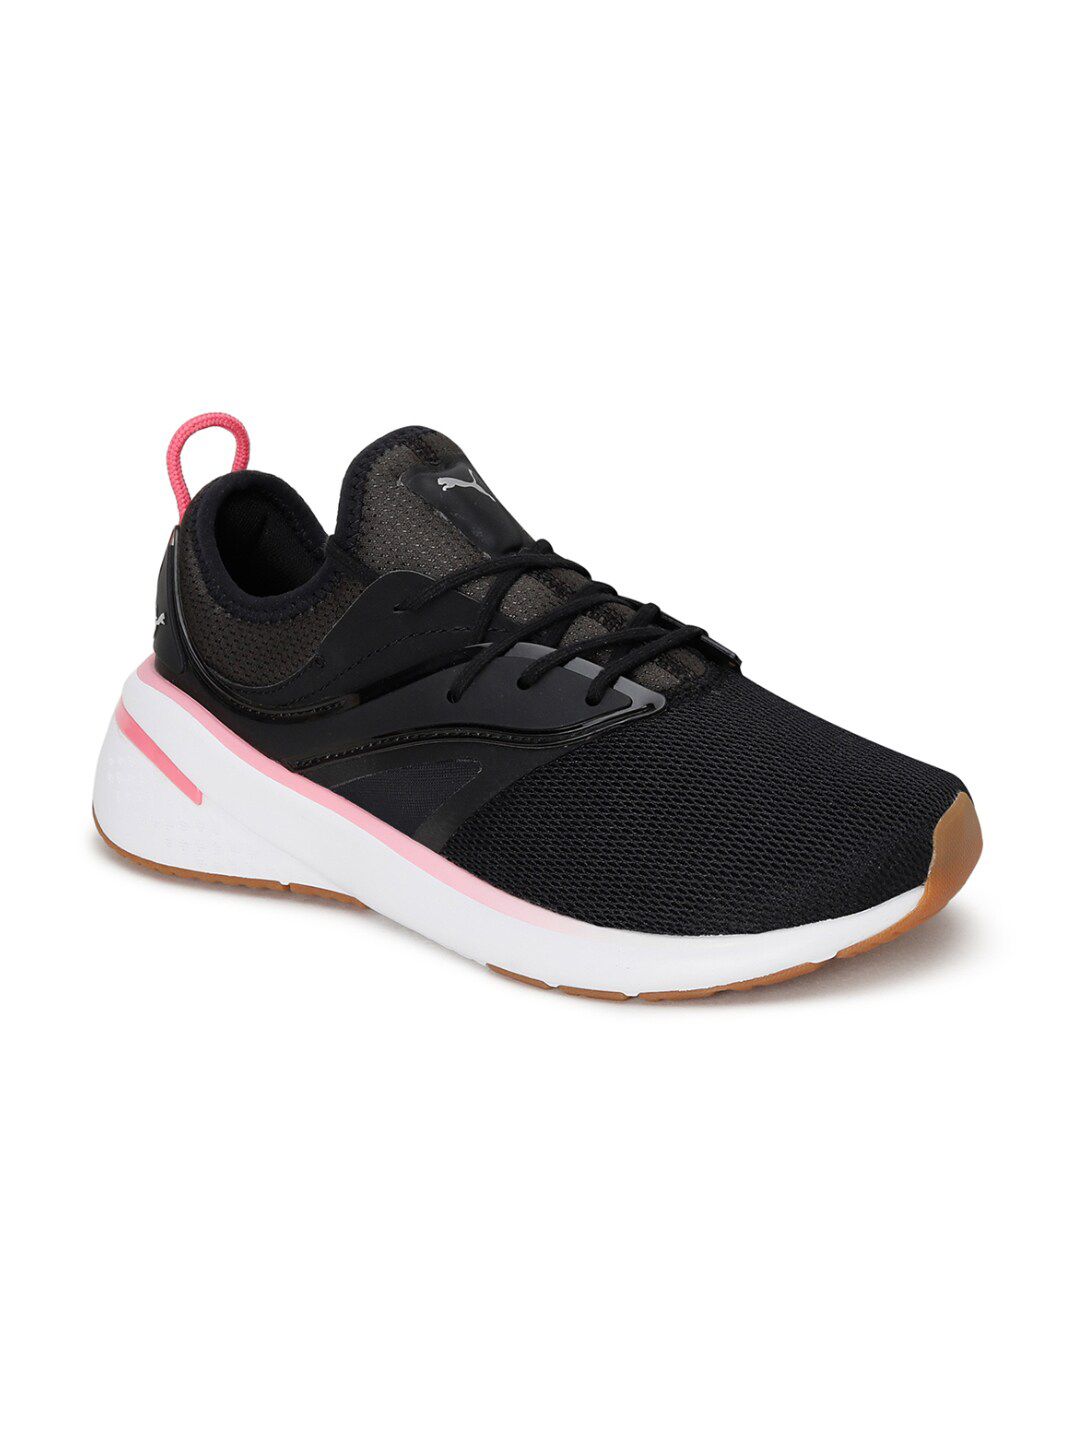 Puma Women Black Forever XT Fade Training Shoes Price in India